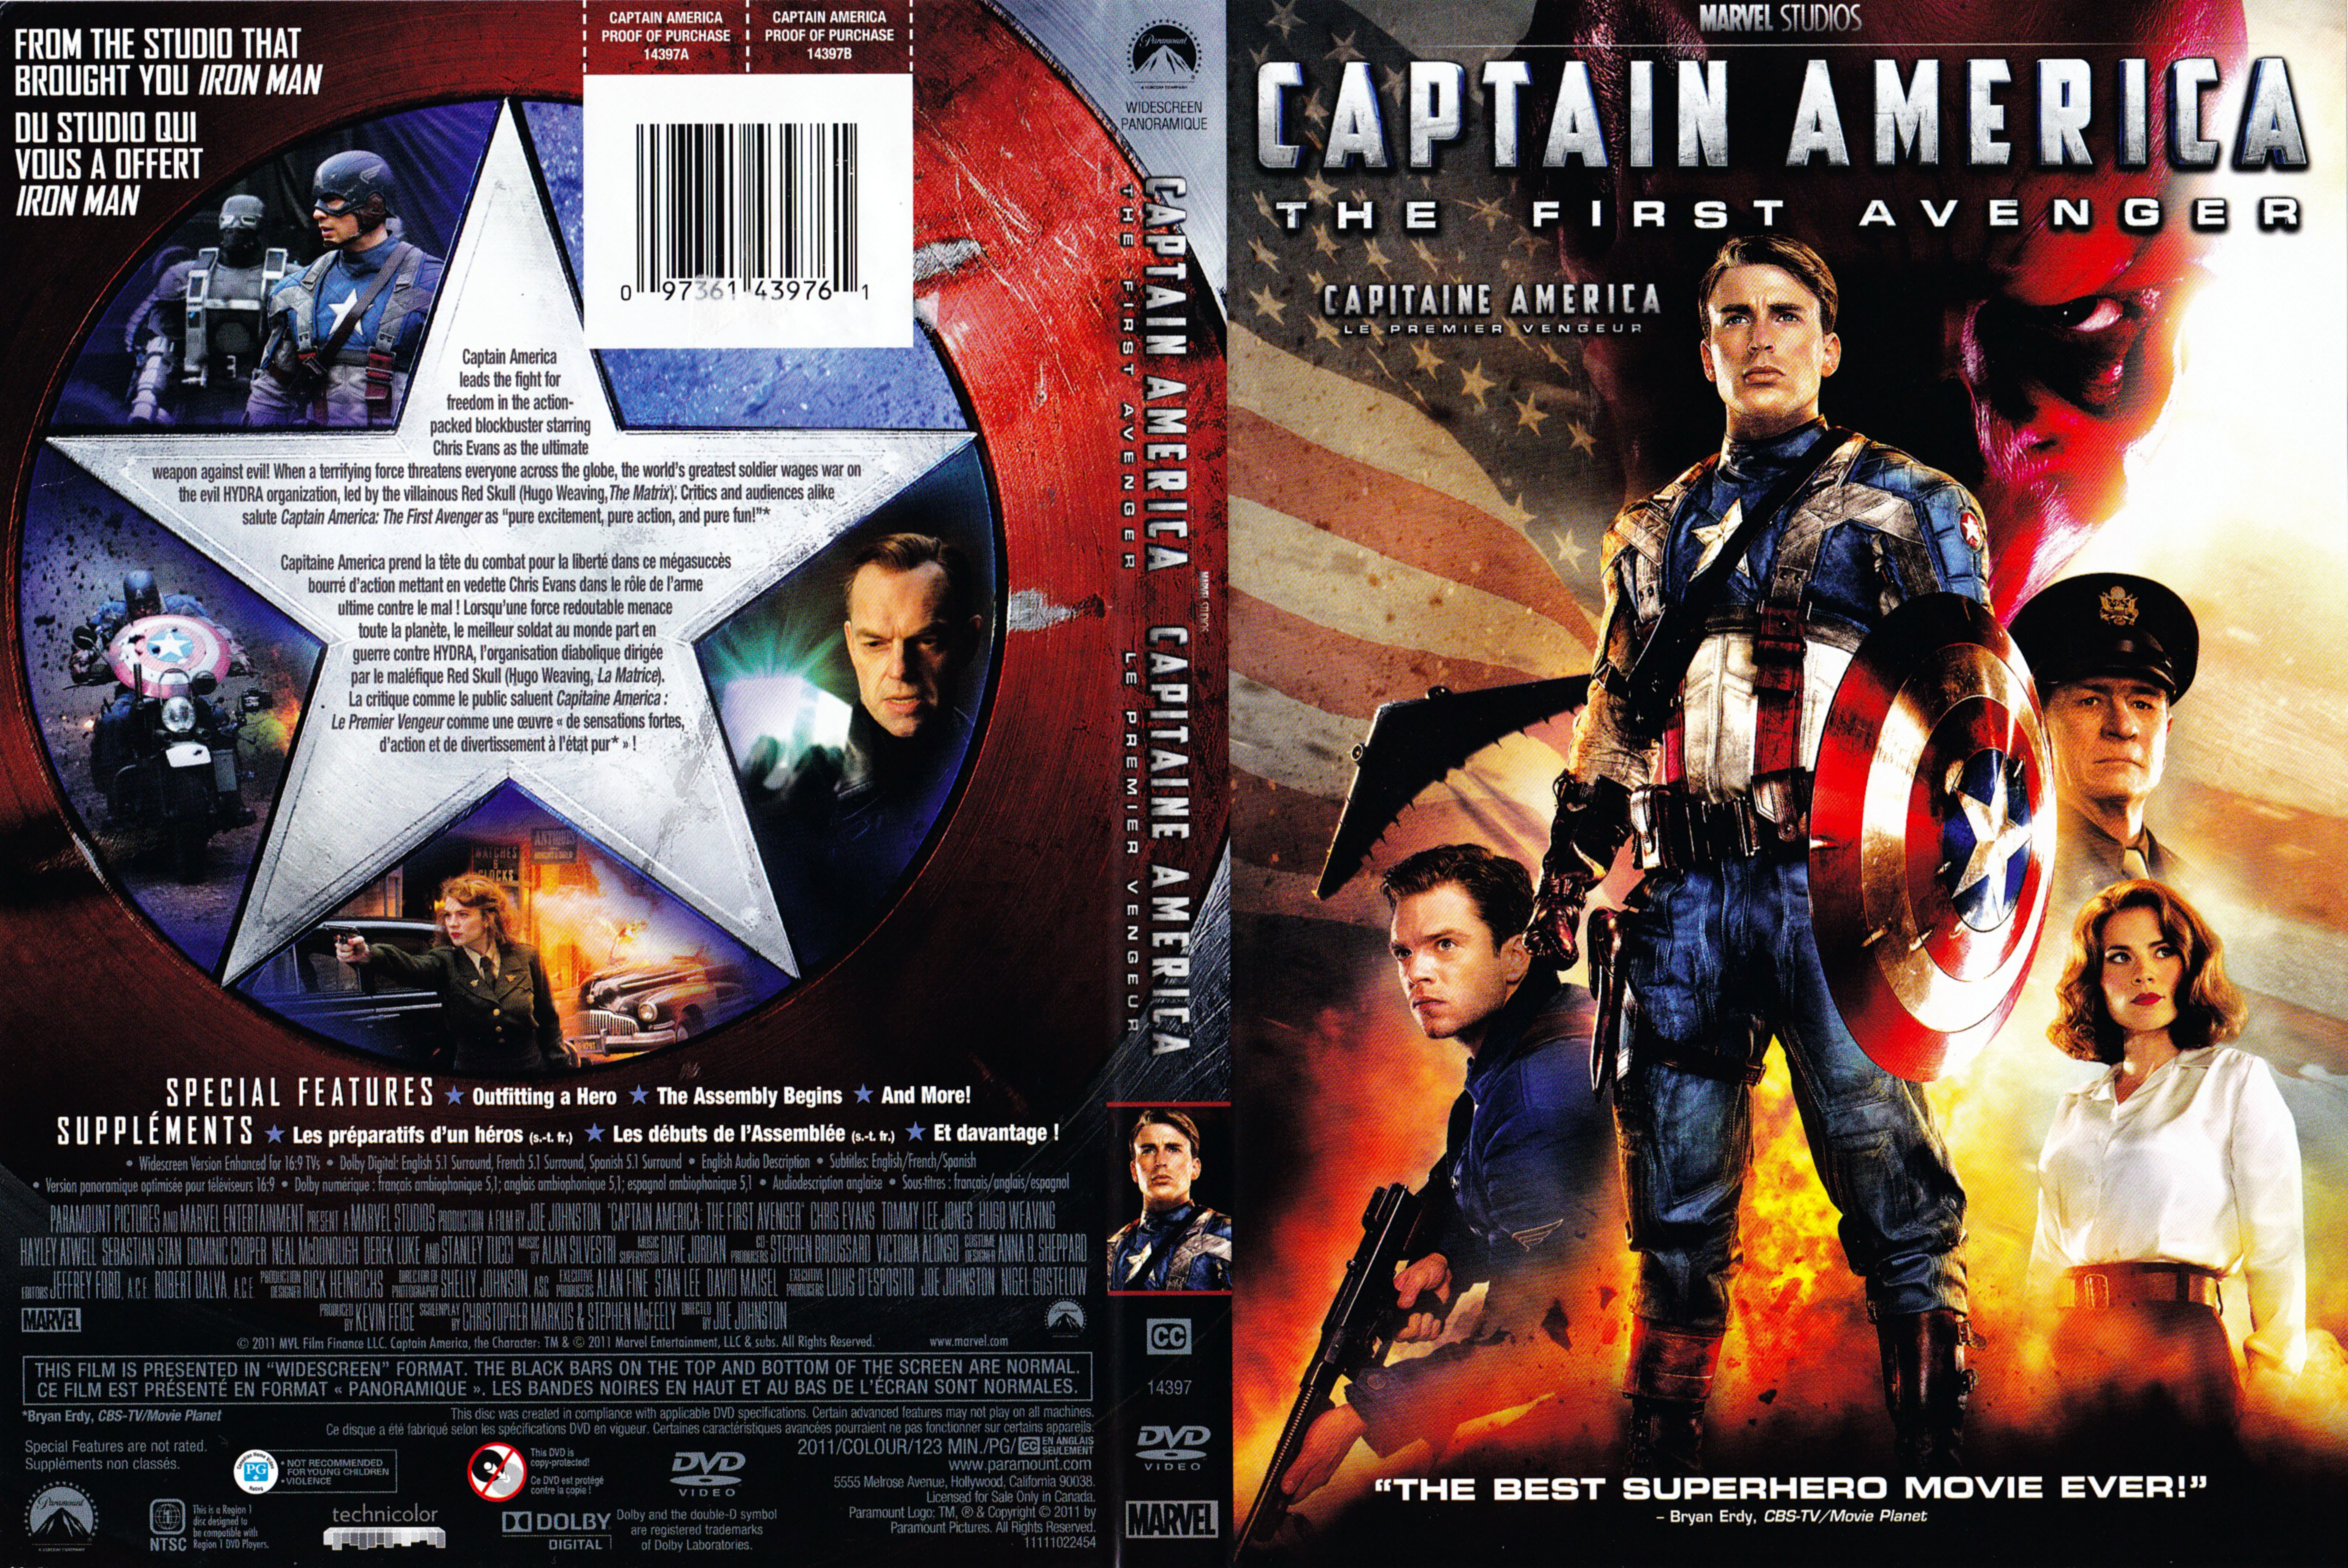 Jaquette DVD Capitain America The first avenger - Capitain America Le premier vengeur (Canadienne)